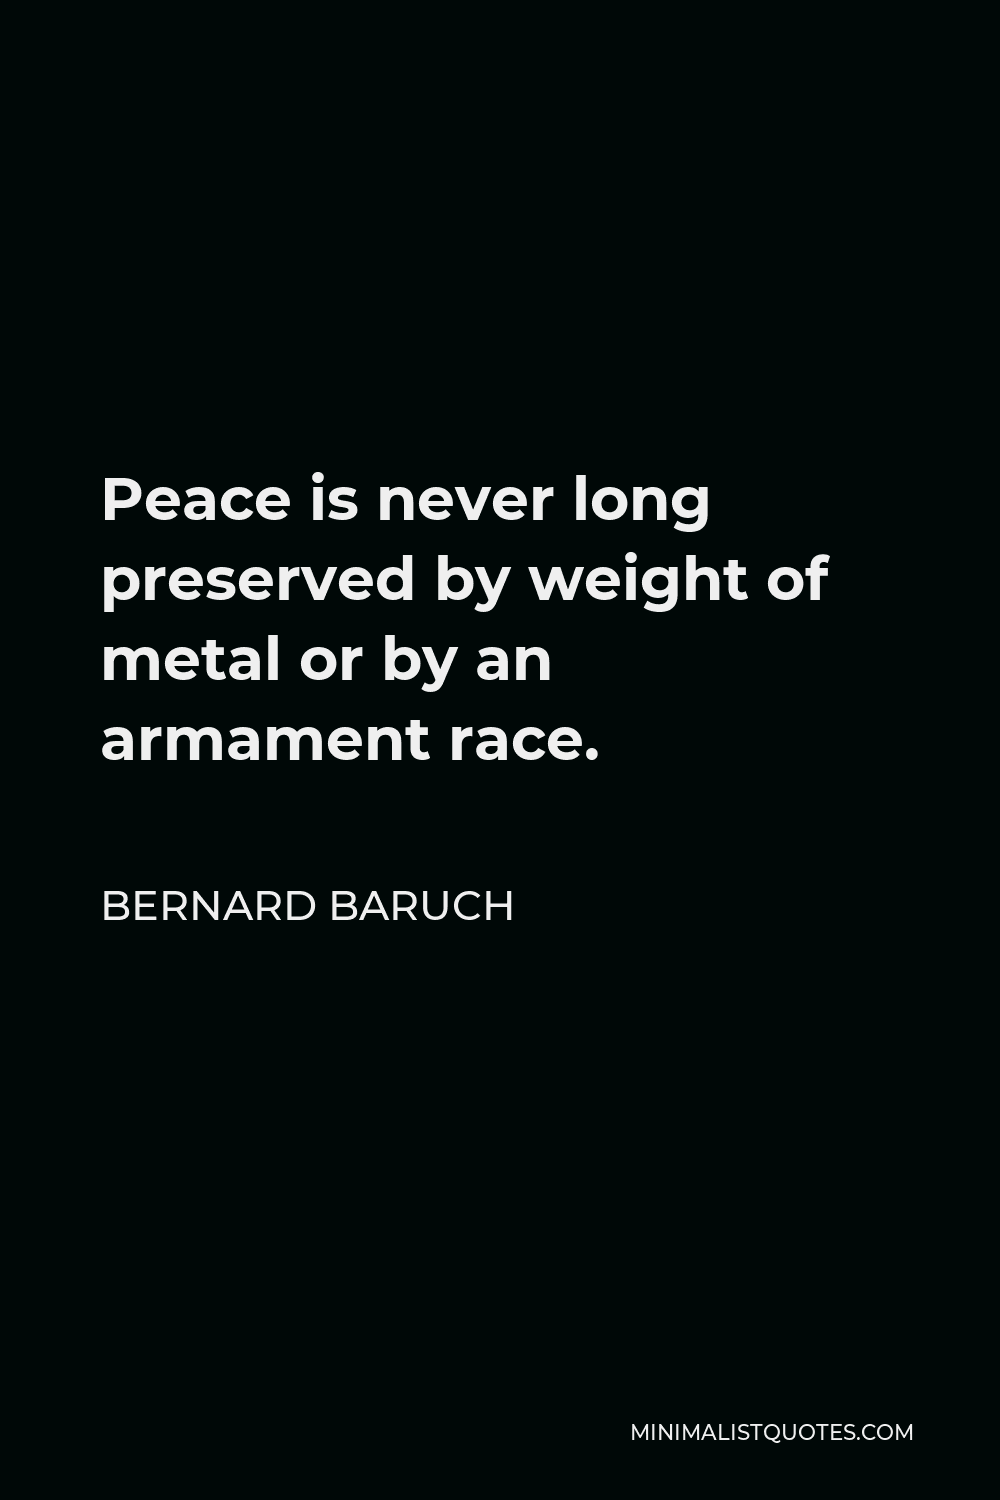 Bernard Baruch Quote - Peace is never long preserved by weight of metal or by an armament race.